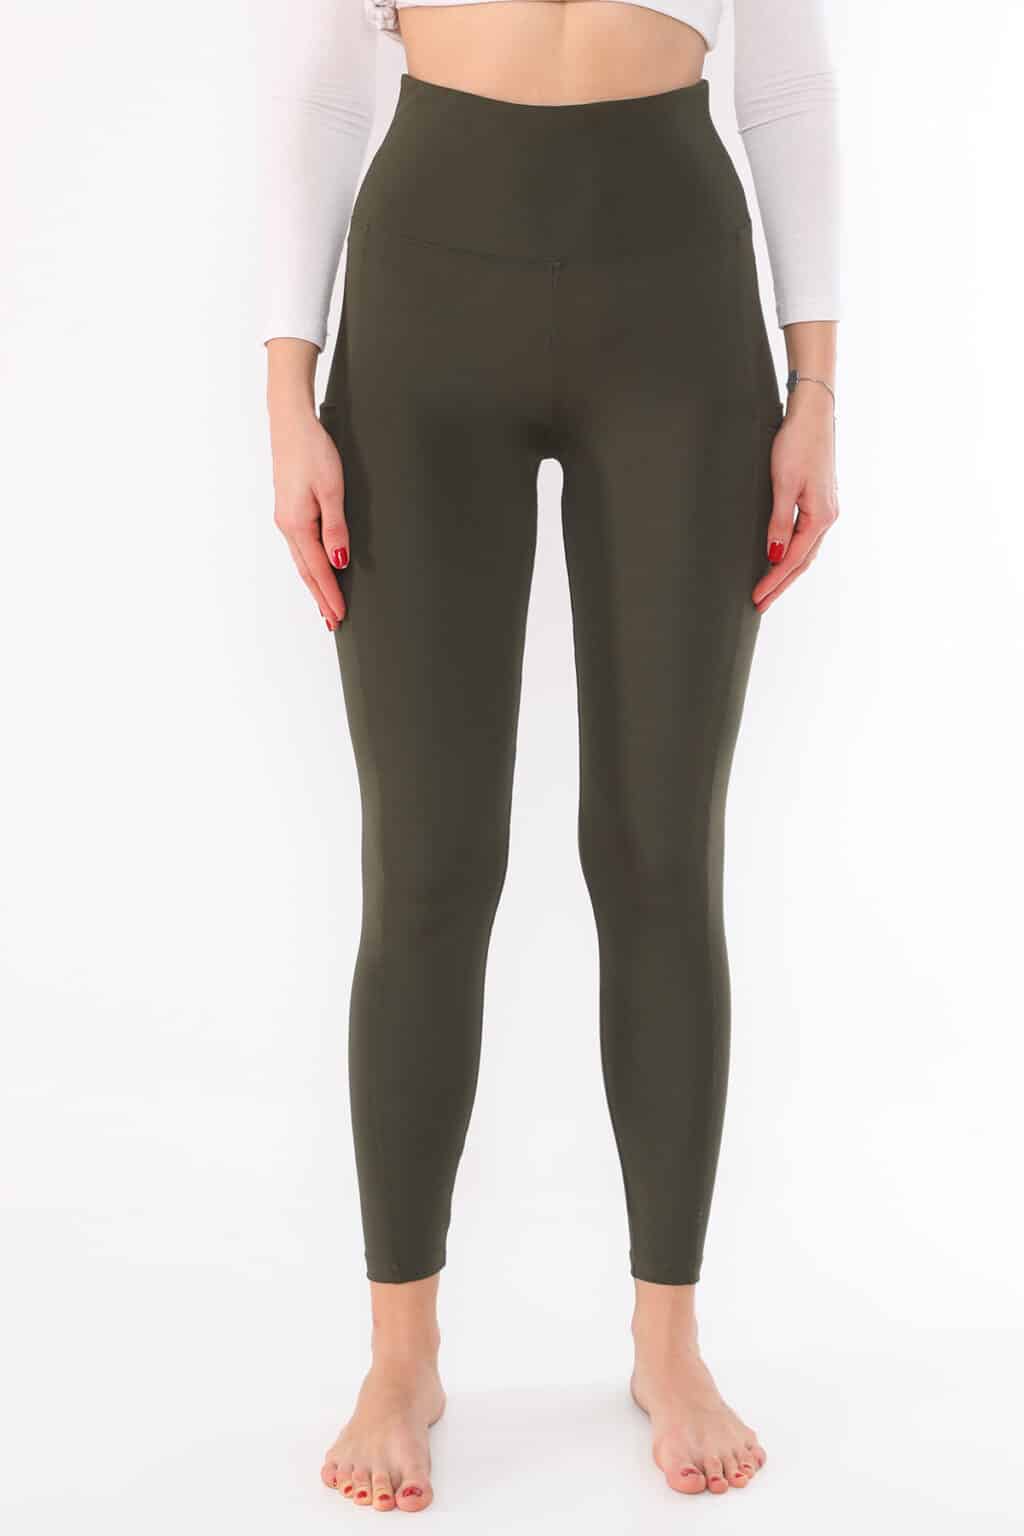 Active Wear High Waisted Olive Color Yoga Pants with Side Pockets